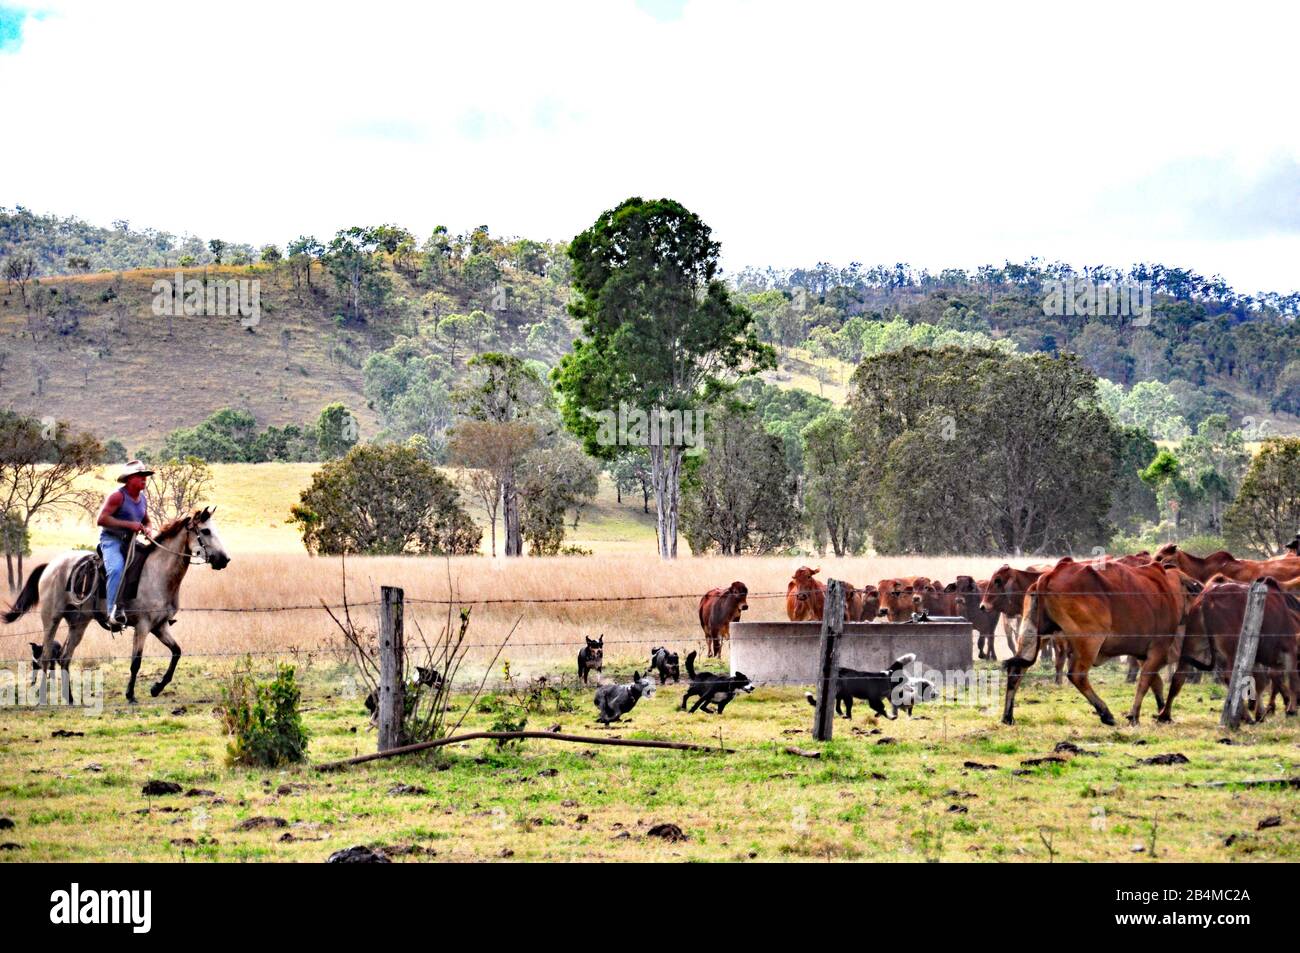 AUSTRALIAN CATTLE STATION MUSTERING CATTLE Stock Photo - Alamy